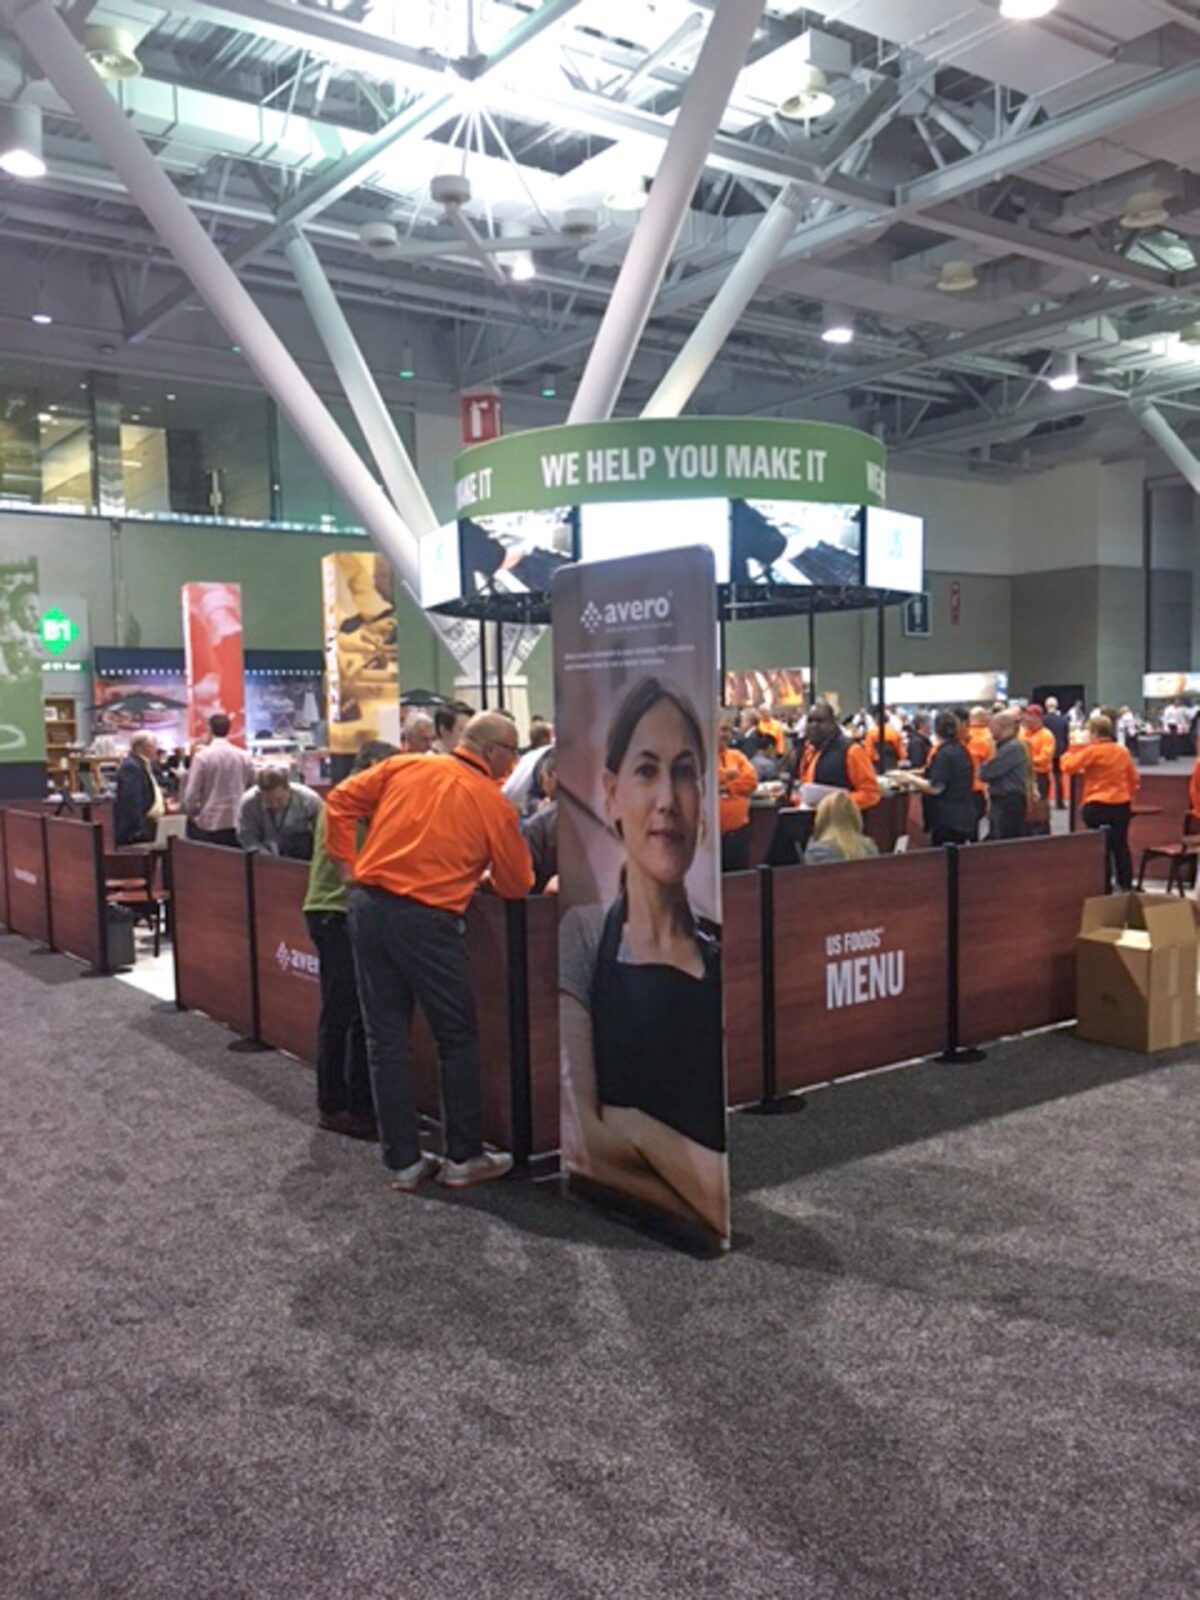 SEG US Foods Round Multiple TV Mount with tubular signage and crowd control double-sided graphics to enclose trade show booth